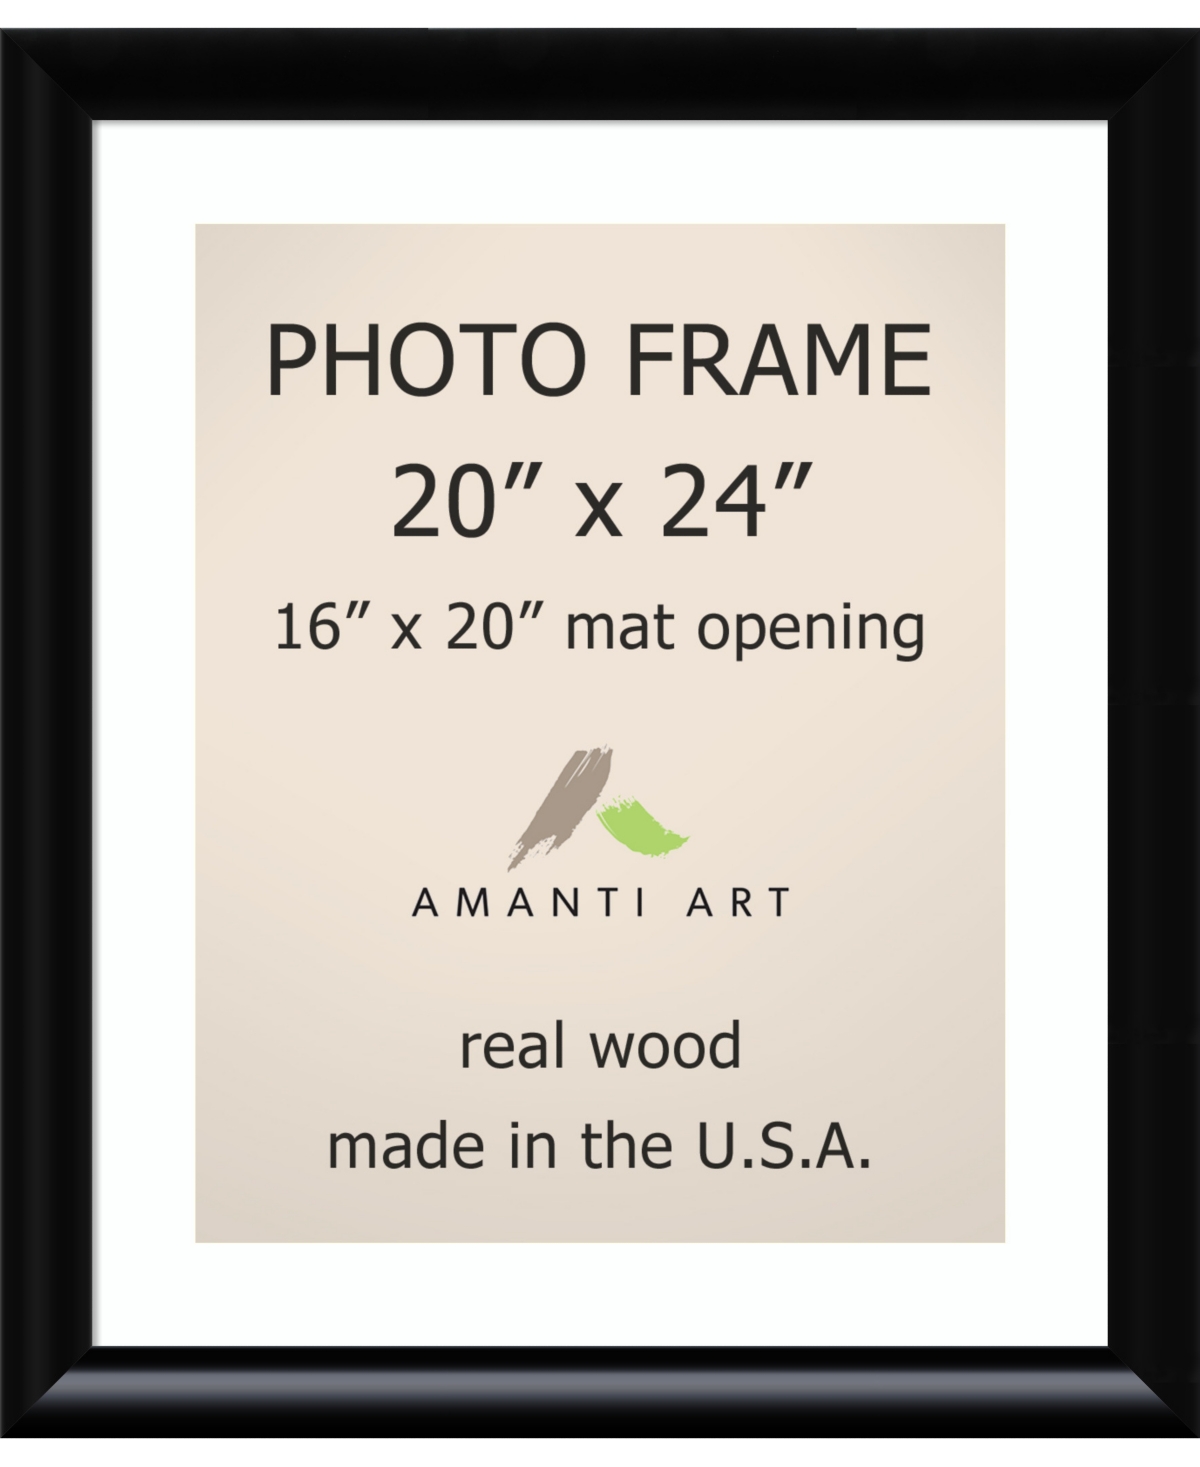 Amanti Art Steinway Black 20 X 24 Matted to 16 X 20 Opening Wall Picture Photo Frame